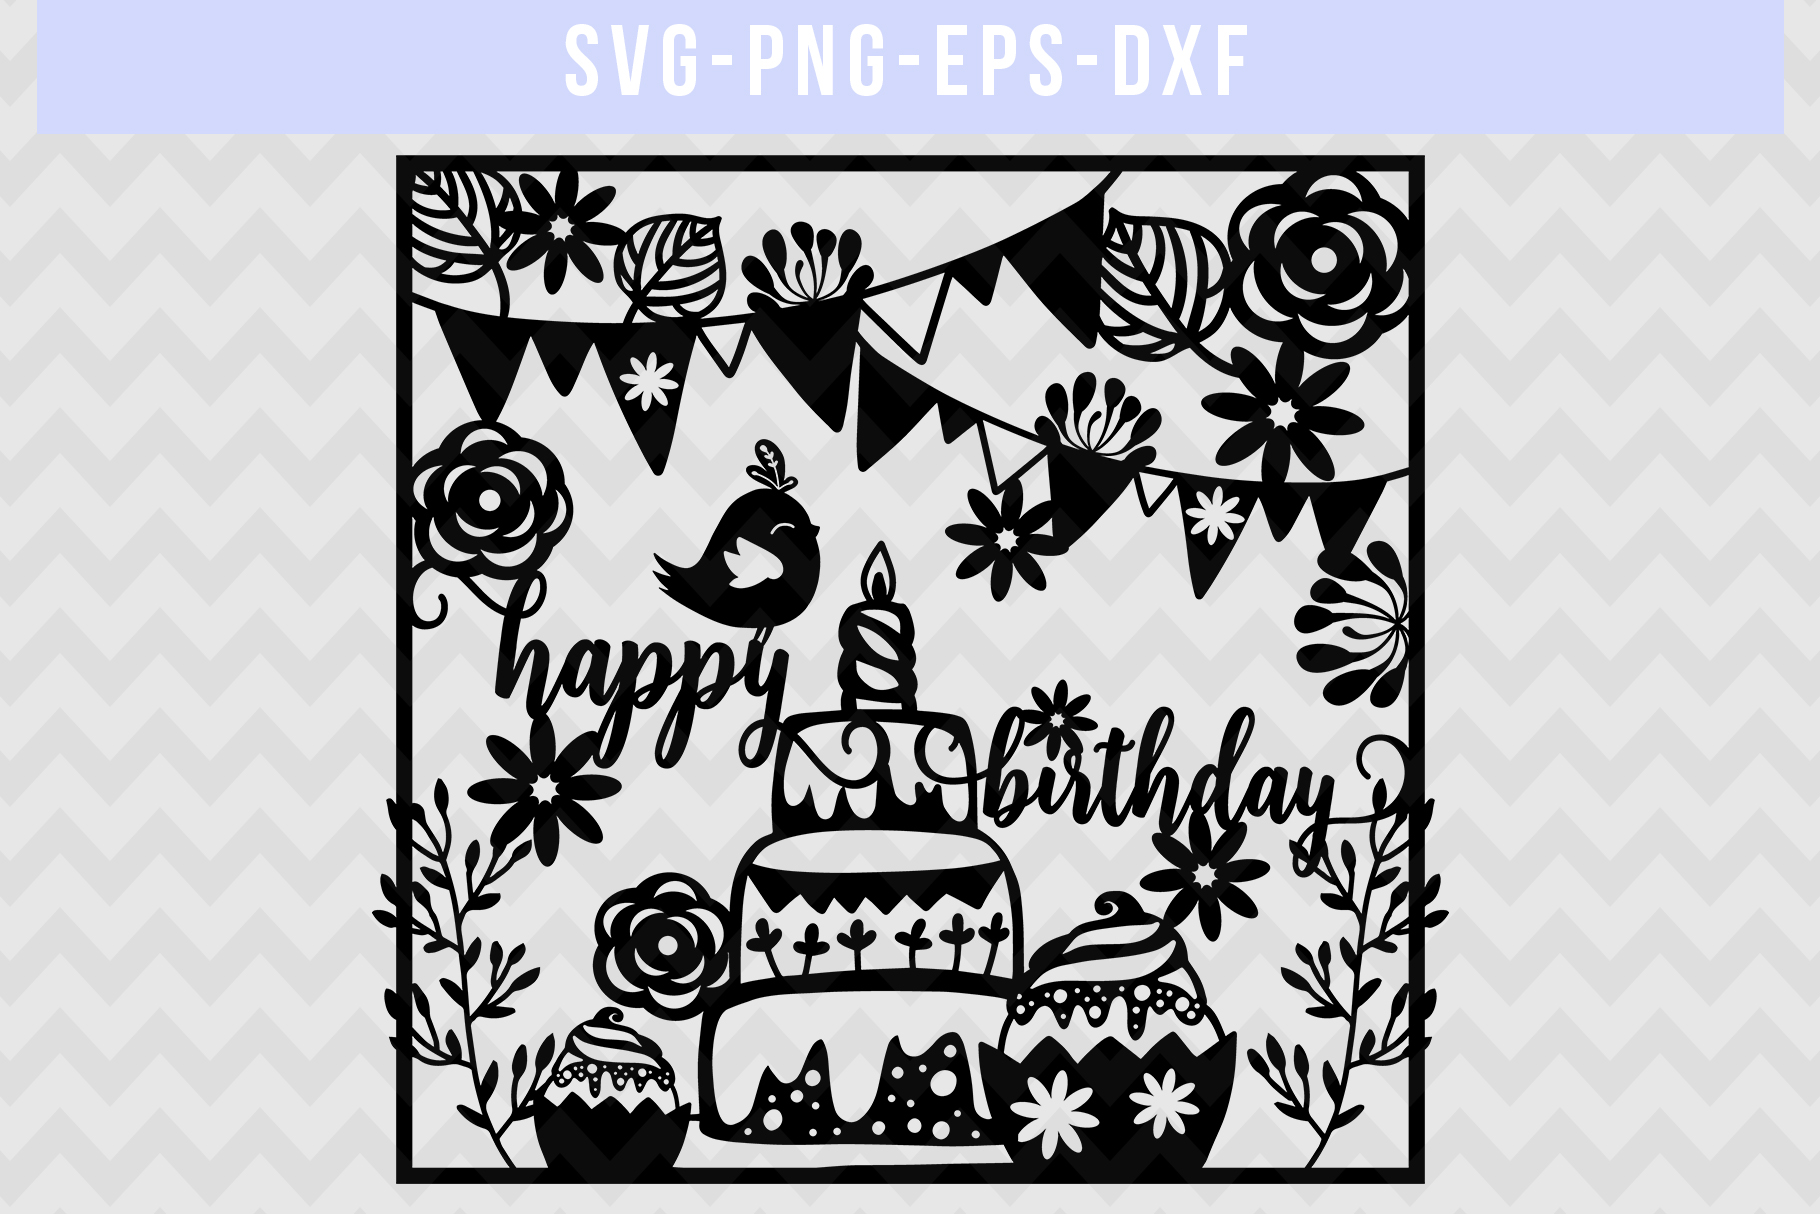 Download Floral Wreath Svg Birthday Card Cover Papercut Birthday Gift Dxf Silhouette Cricut Cupcake Clipart Cutting File Paper Cut Template Clip Art Art Collectibles Minyamarket Com